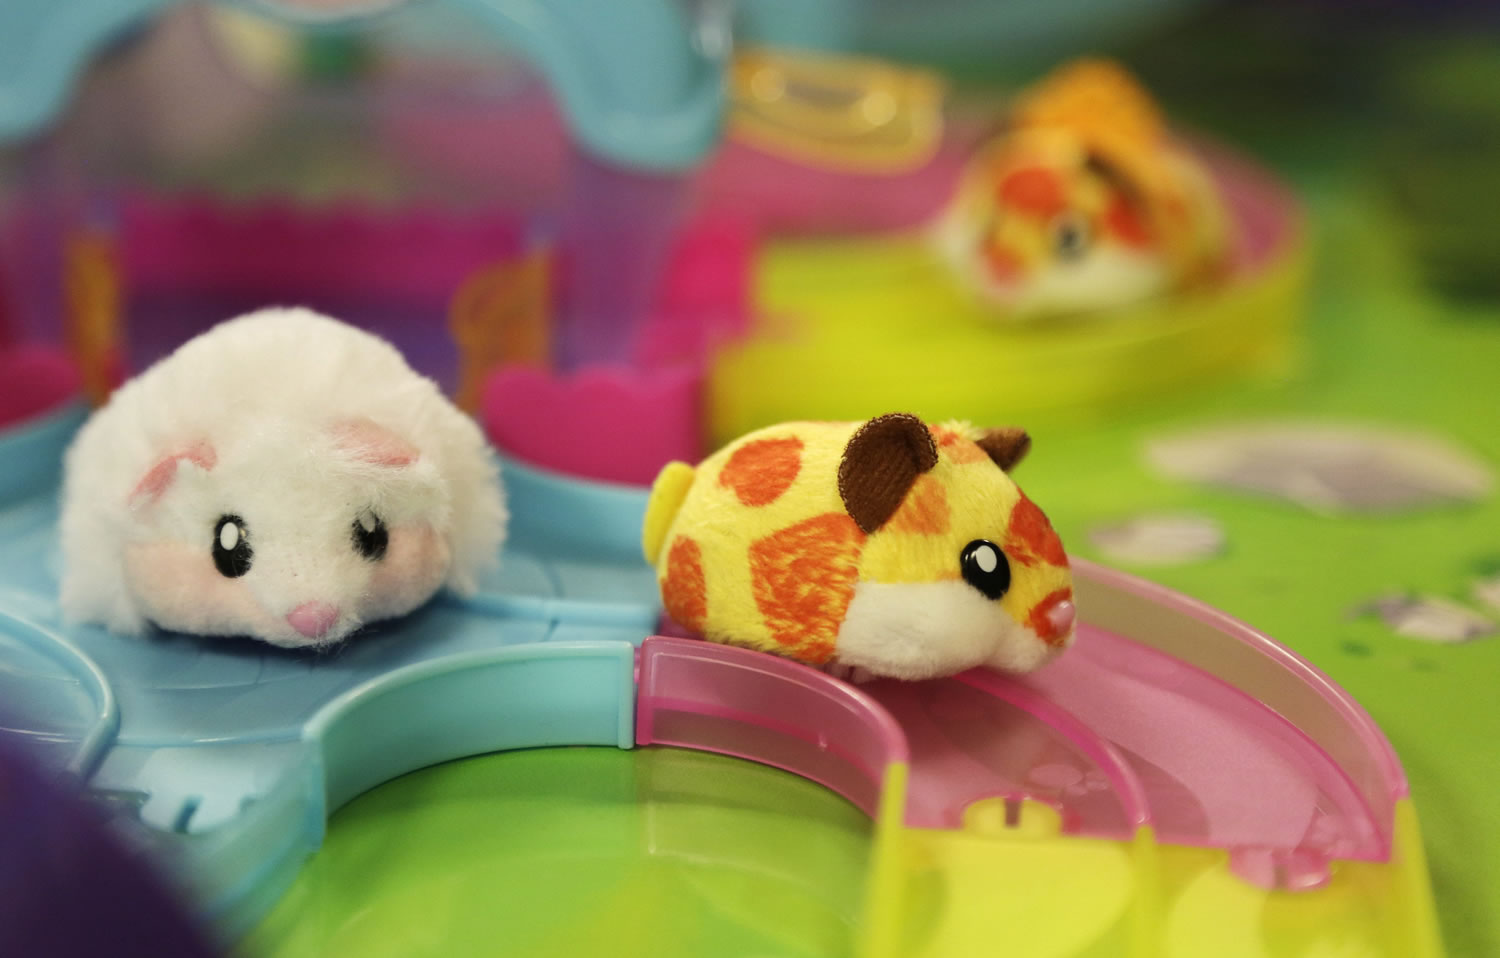 Hamster in a House, from Zuru Toys. Nine fuzzy hamsters scurry around tracks to the different hamster houses.